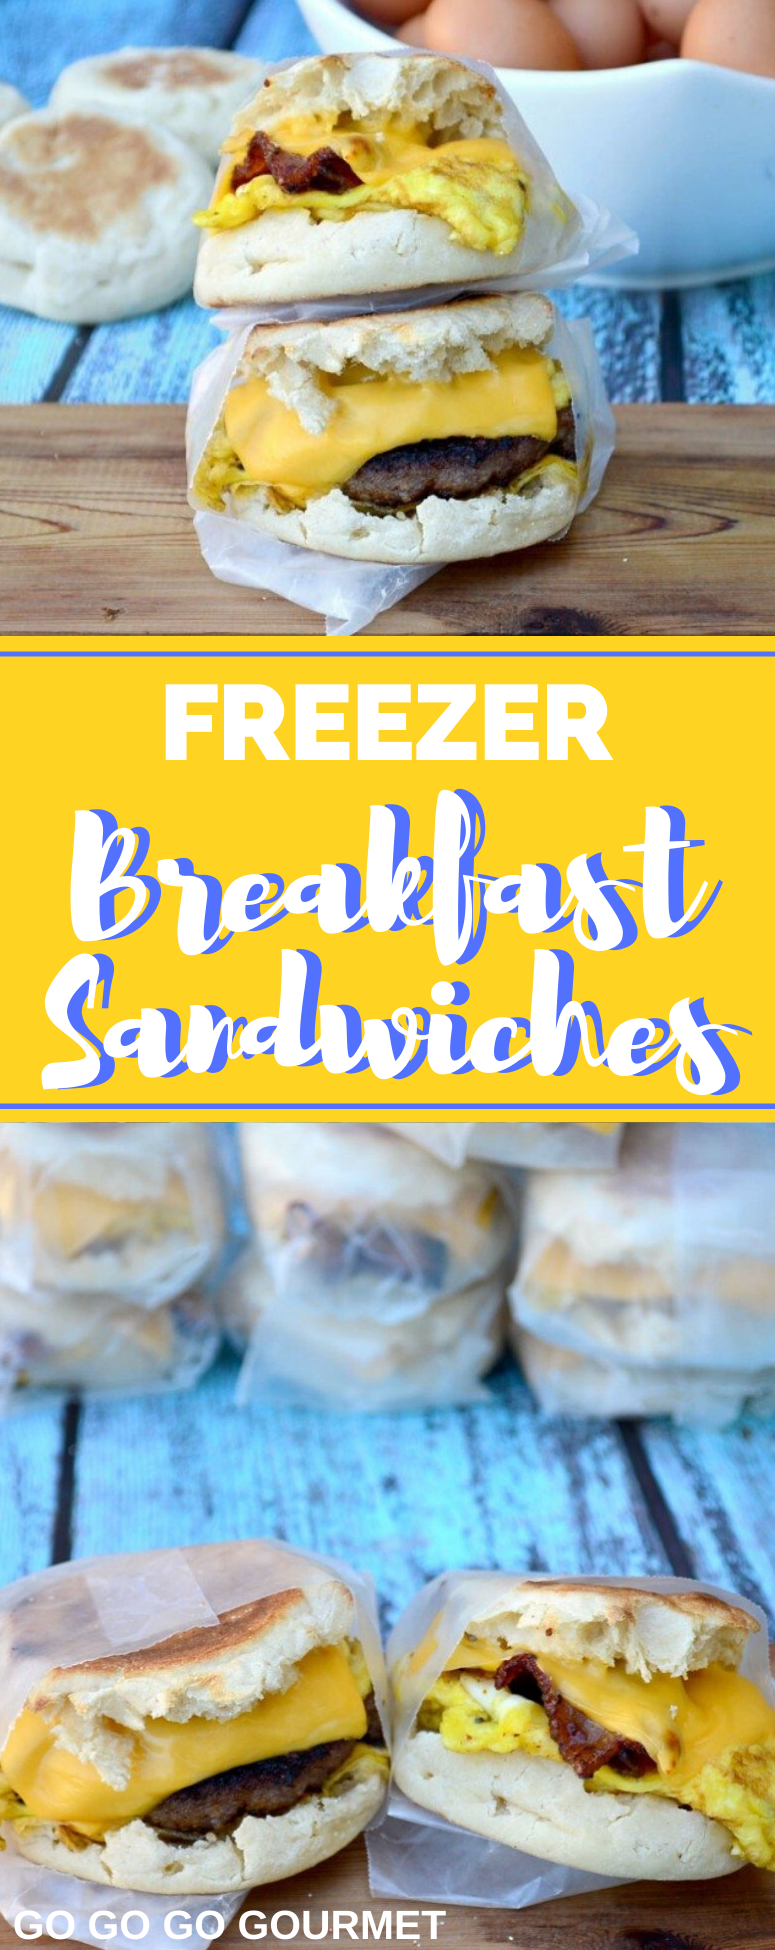 These easy Freezer Breakfast Sandwiches are perfect for a quick breakfast on the go! You can use an English muffin, bagel, slice of bread, croissant or even a biscuit! Make ahead and stock the freezer for the week! #gogogogourmet #freezerbreakfastsandwiches #breakfastsandwiches #quickbreakfasts via @gogogogourmet